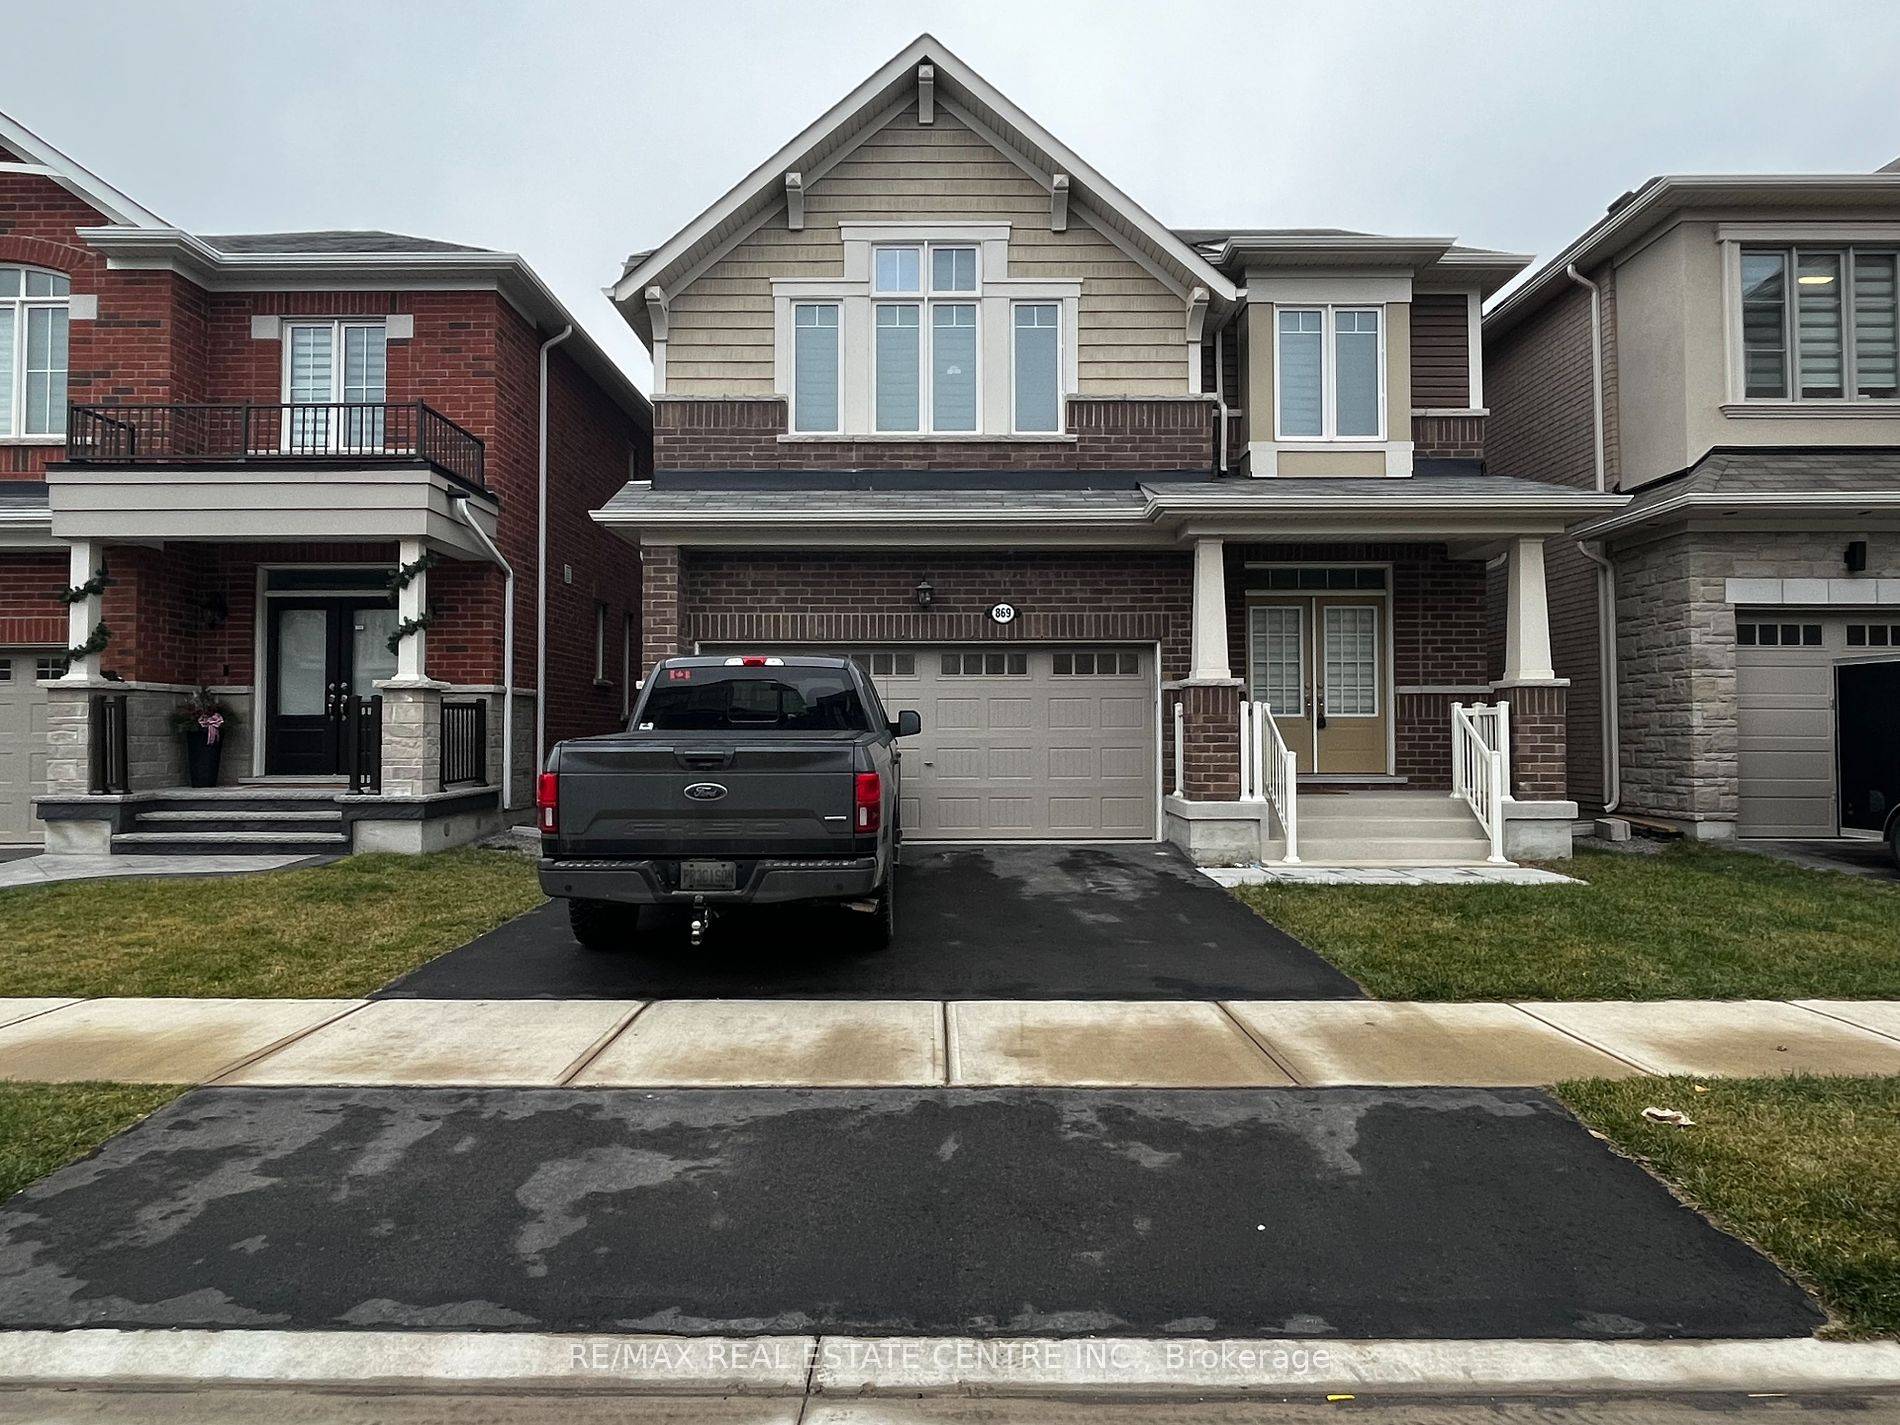 Immensely Upgraded 4 br 4 wr house without basement offers an inviting main floor with a spacious living area seamlessly connected to an open concept kitchen dining, upgraded large quartz ...